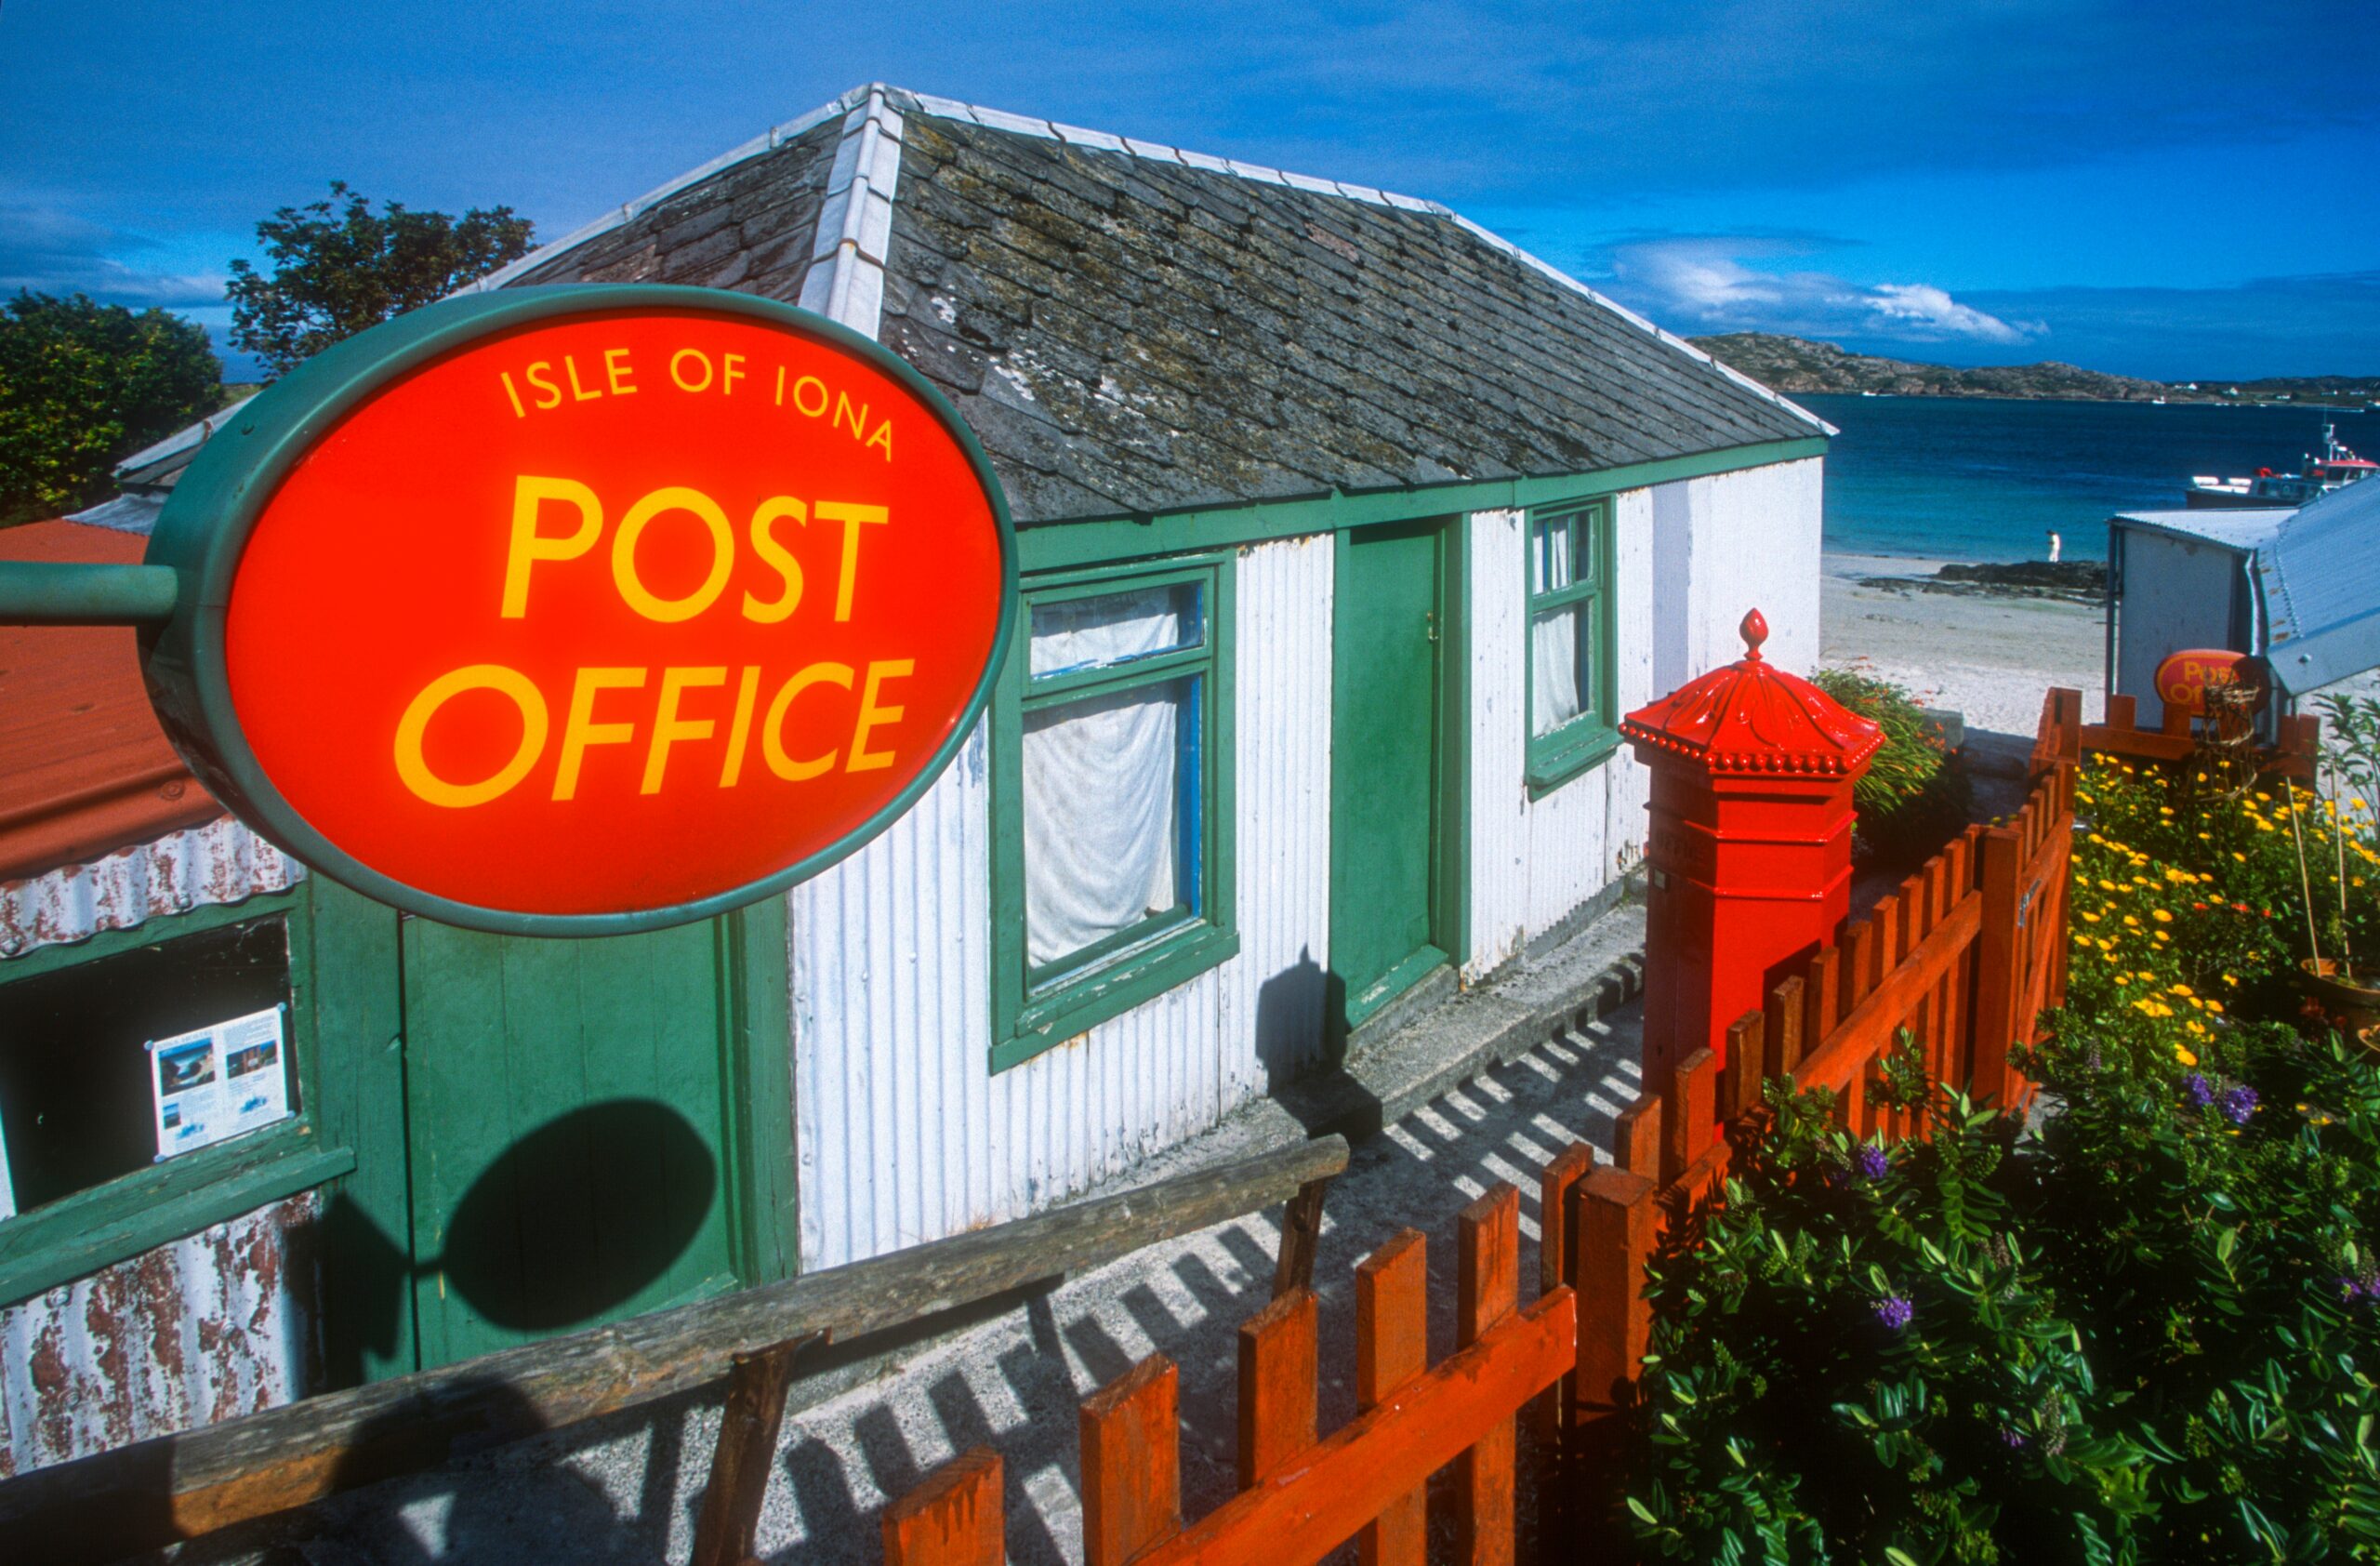 Image of a Post Office